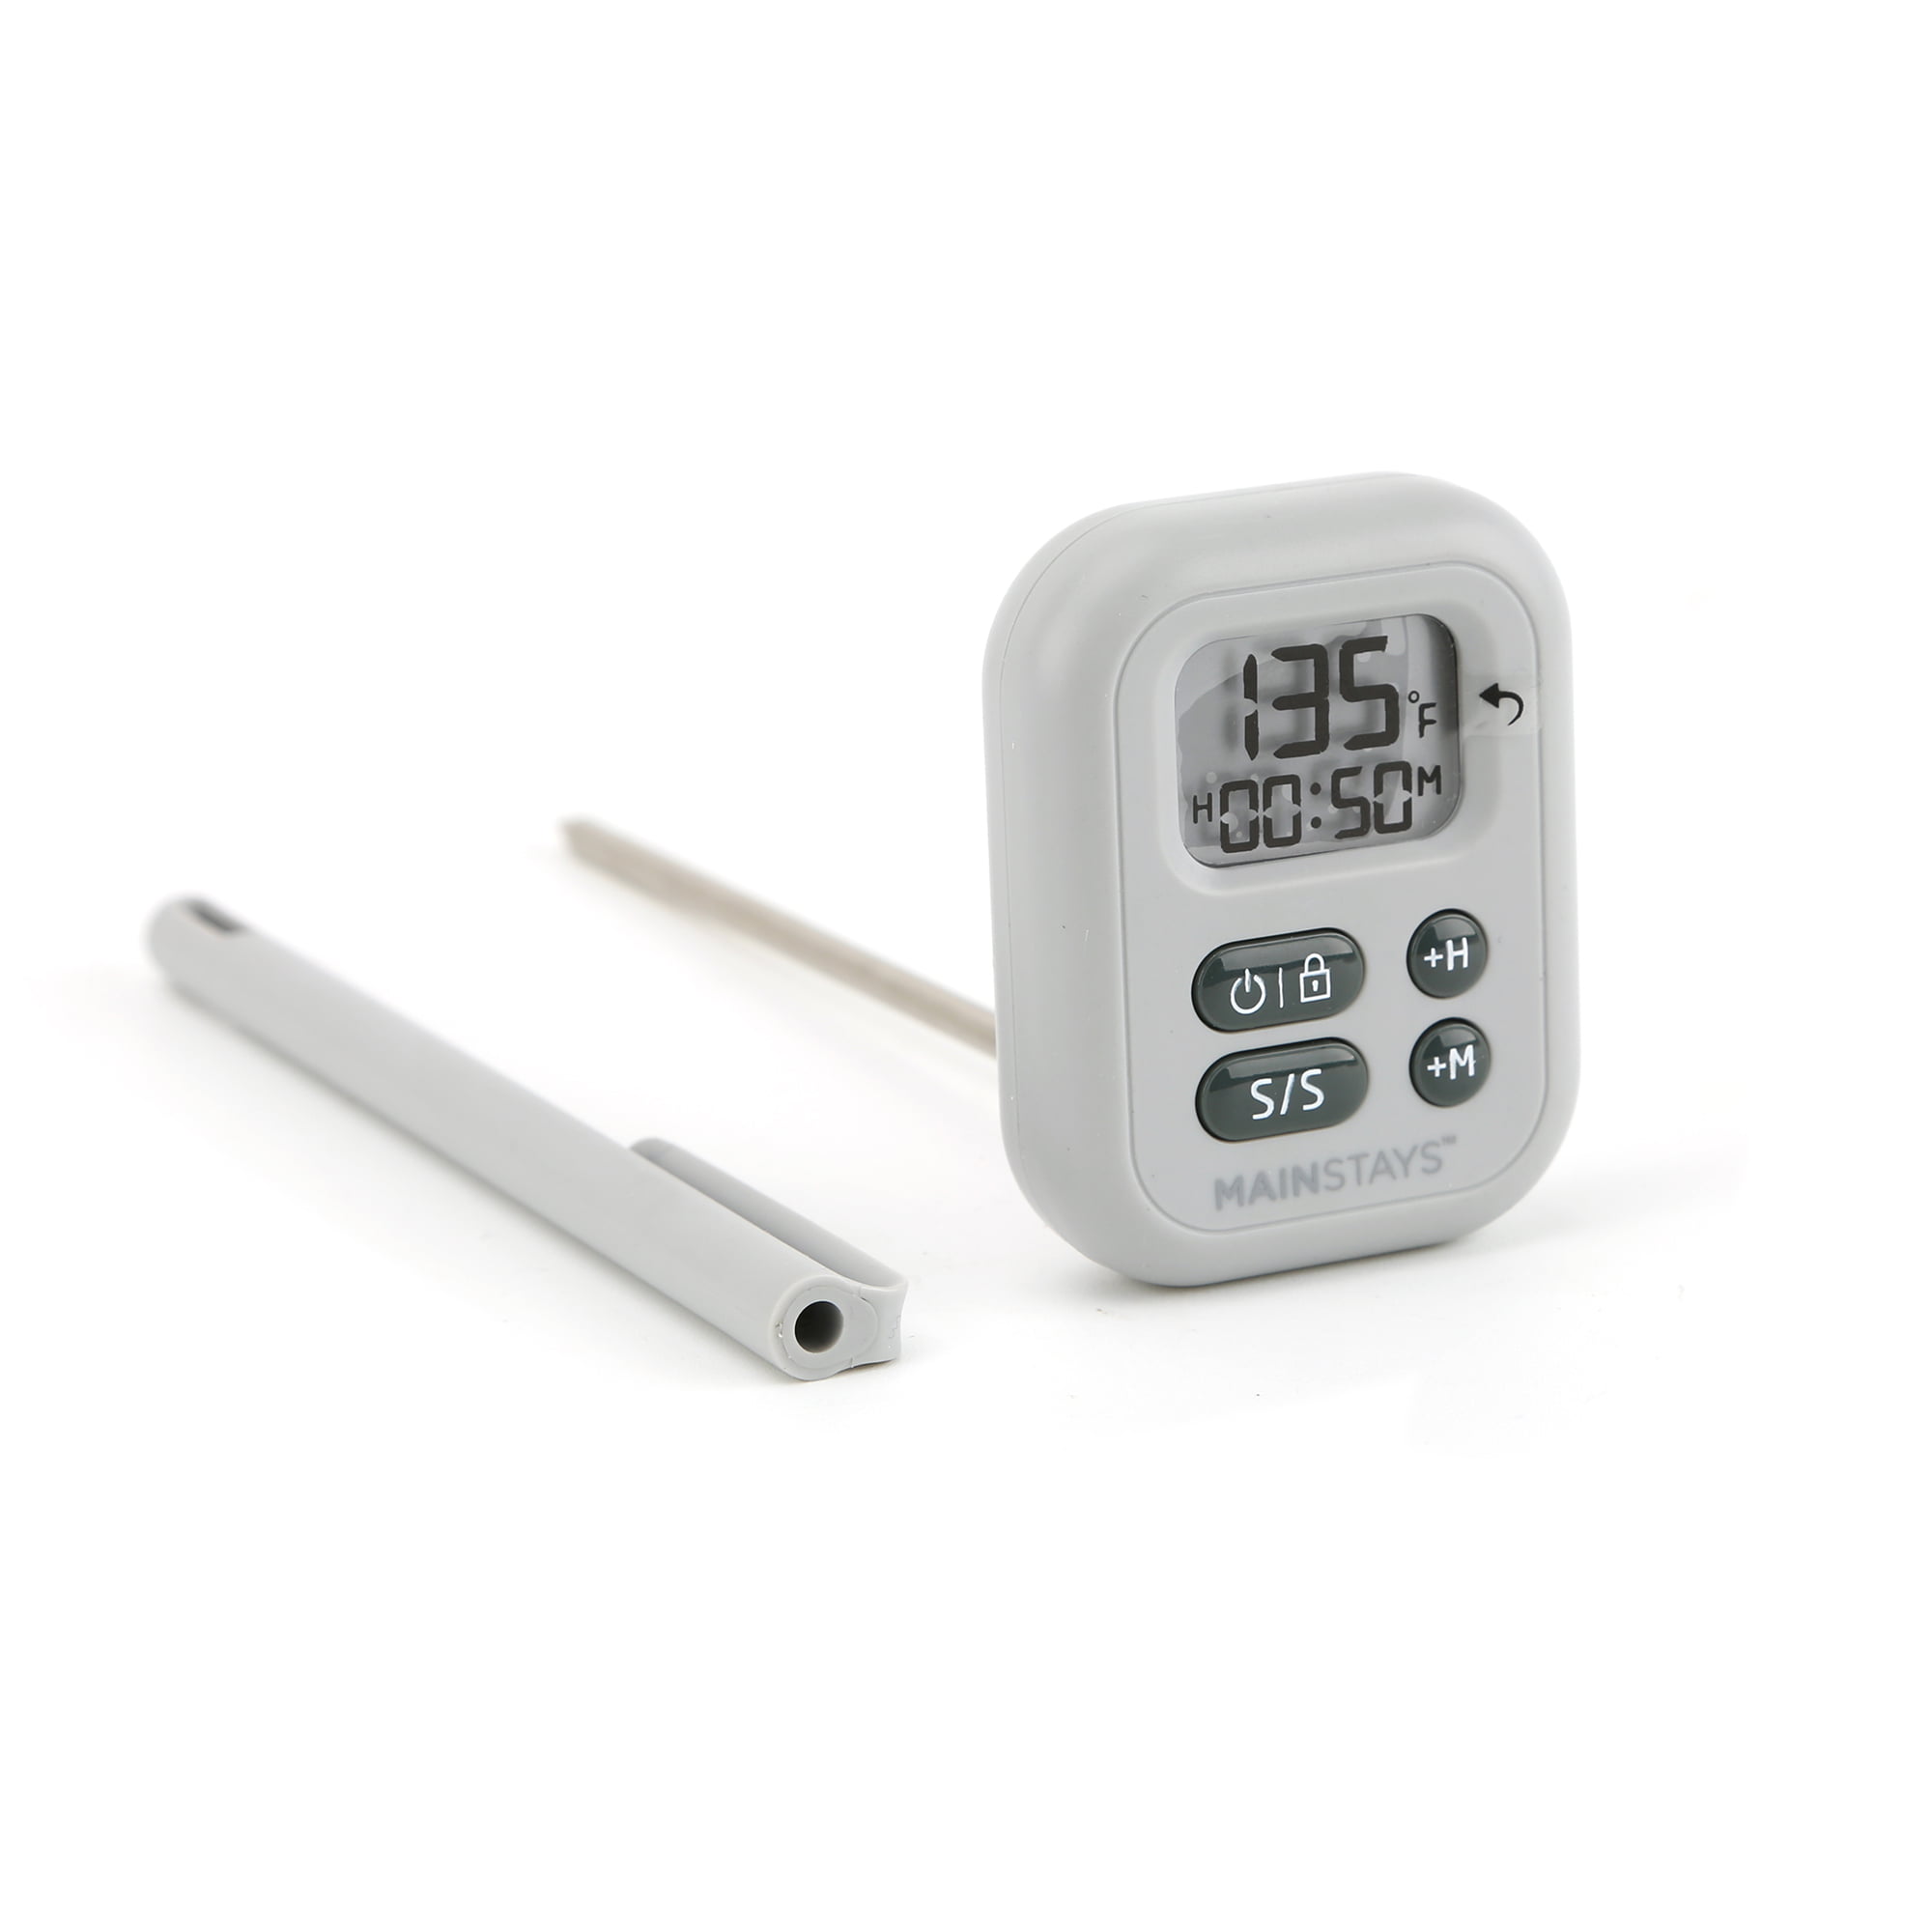 Parini Pocket Digital Instant Read Thermometer, Pen Style, LCD Screen, Stainless Steel Probe, Food Cooking Thermometer for Grill and Barbecue